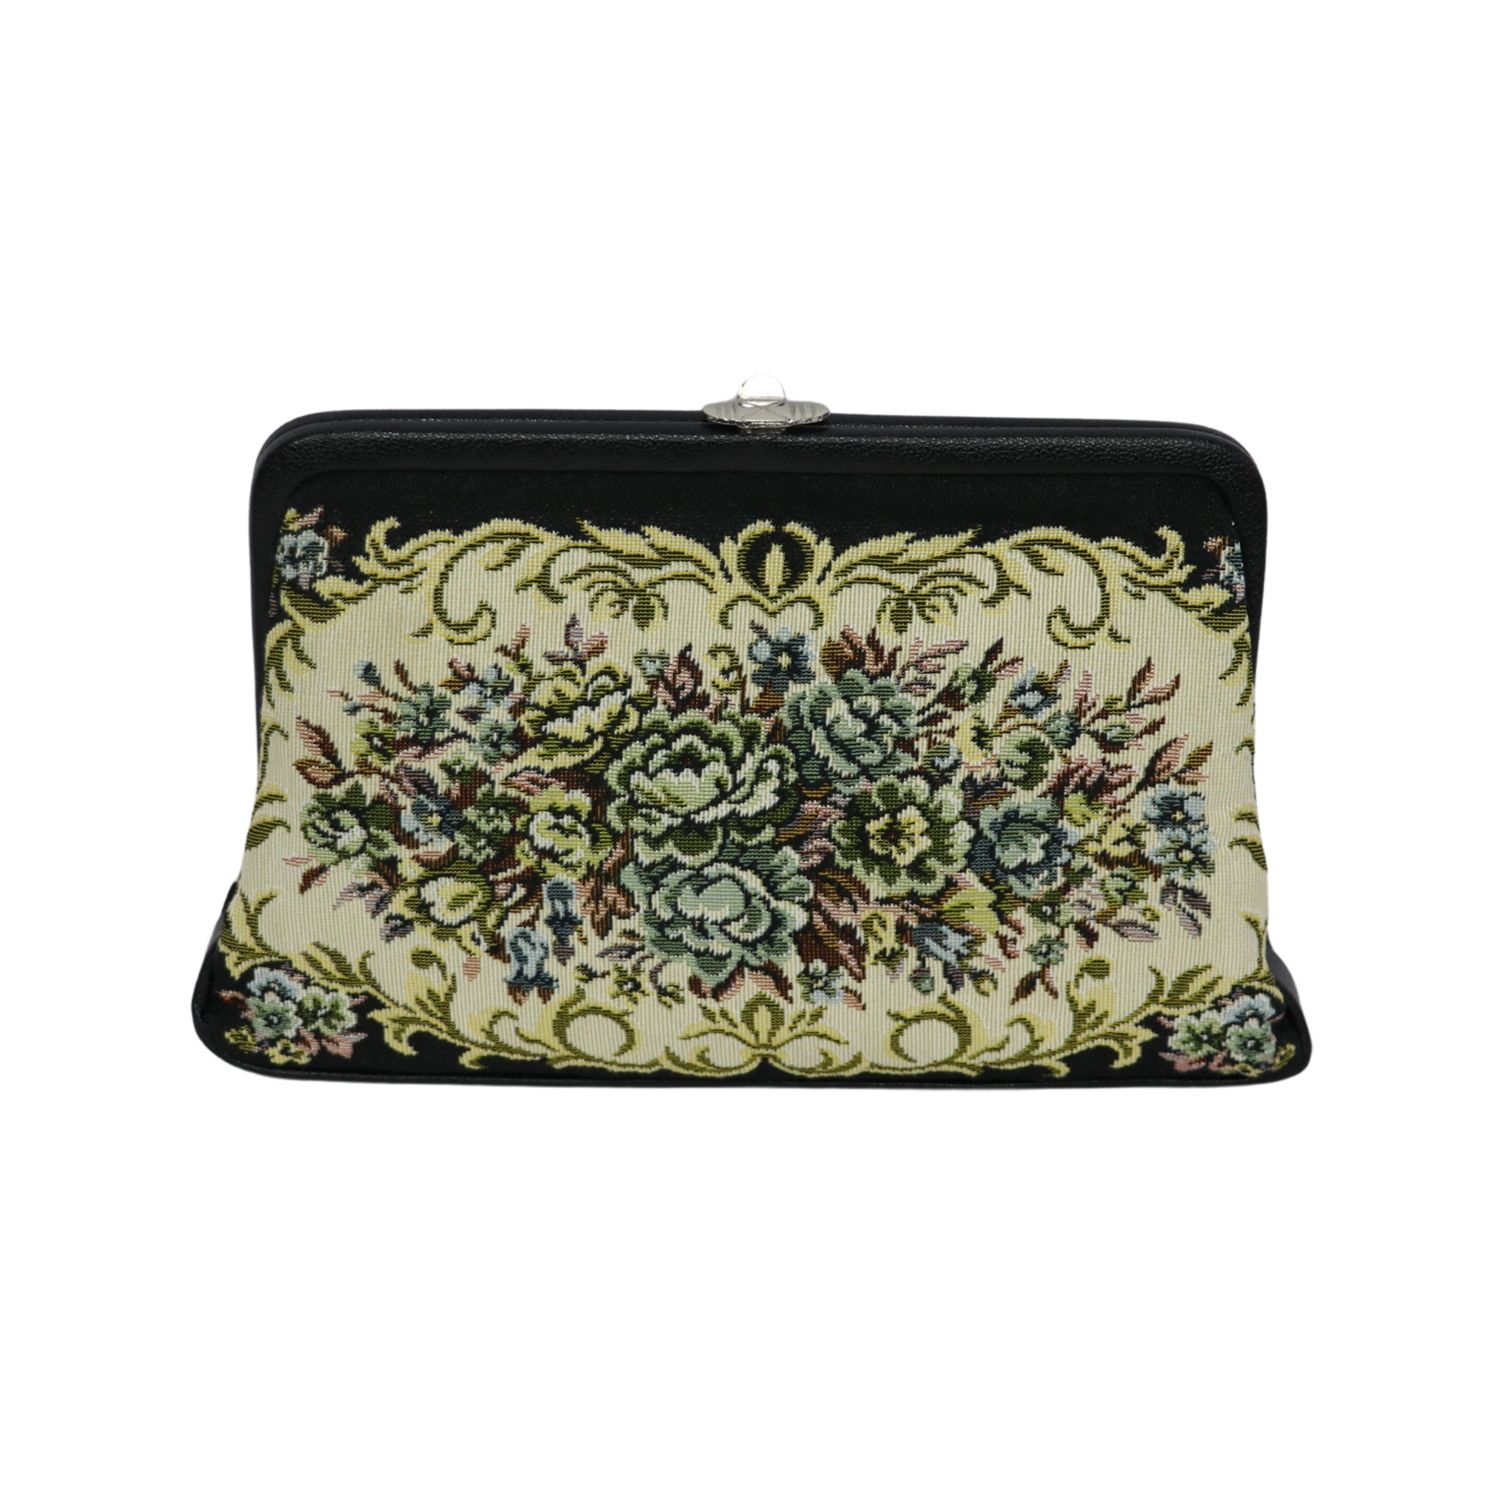 EMM | Black printed wallet clutch for party